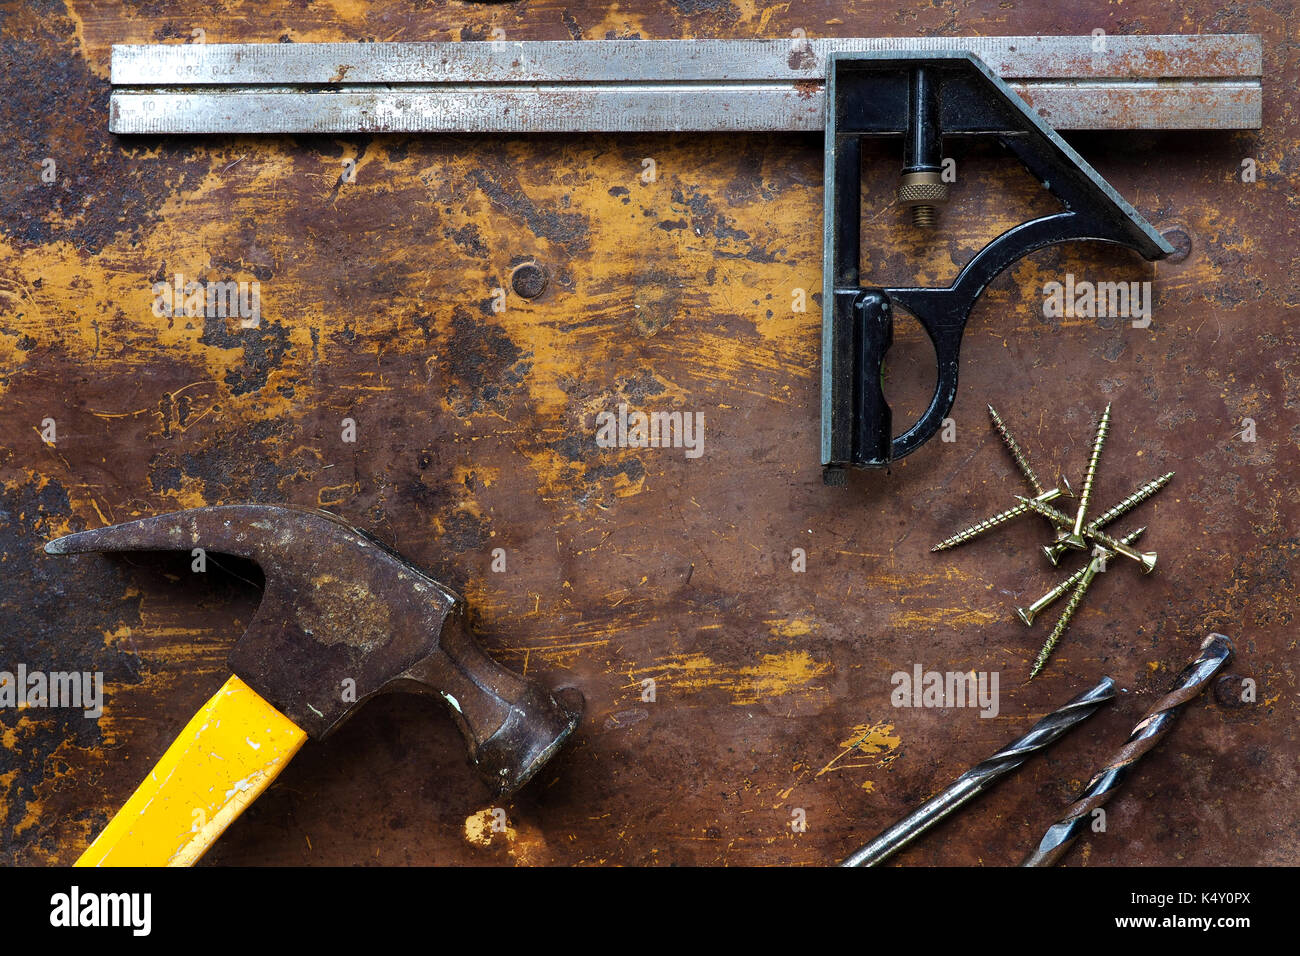 Set square and tools on textured surface Stock Photo